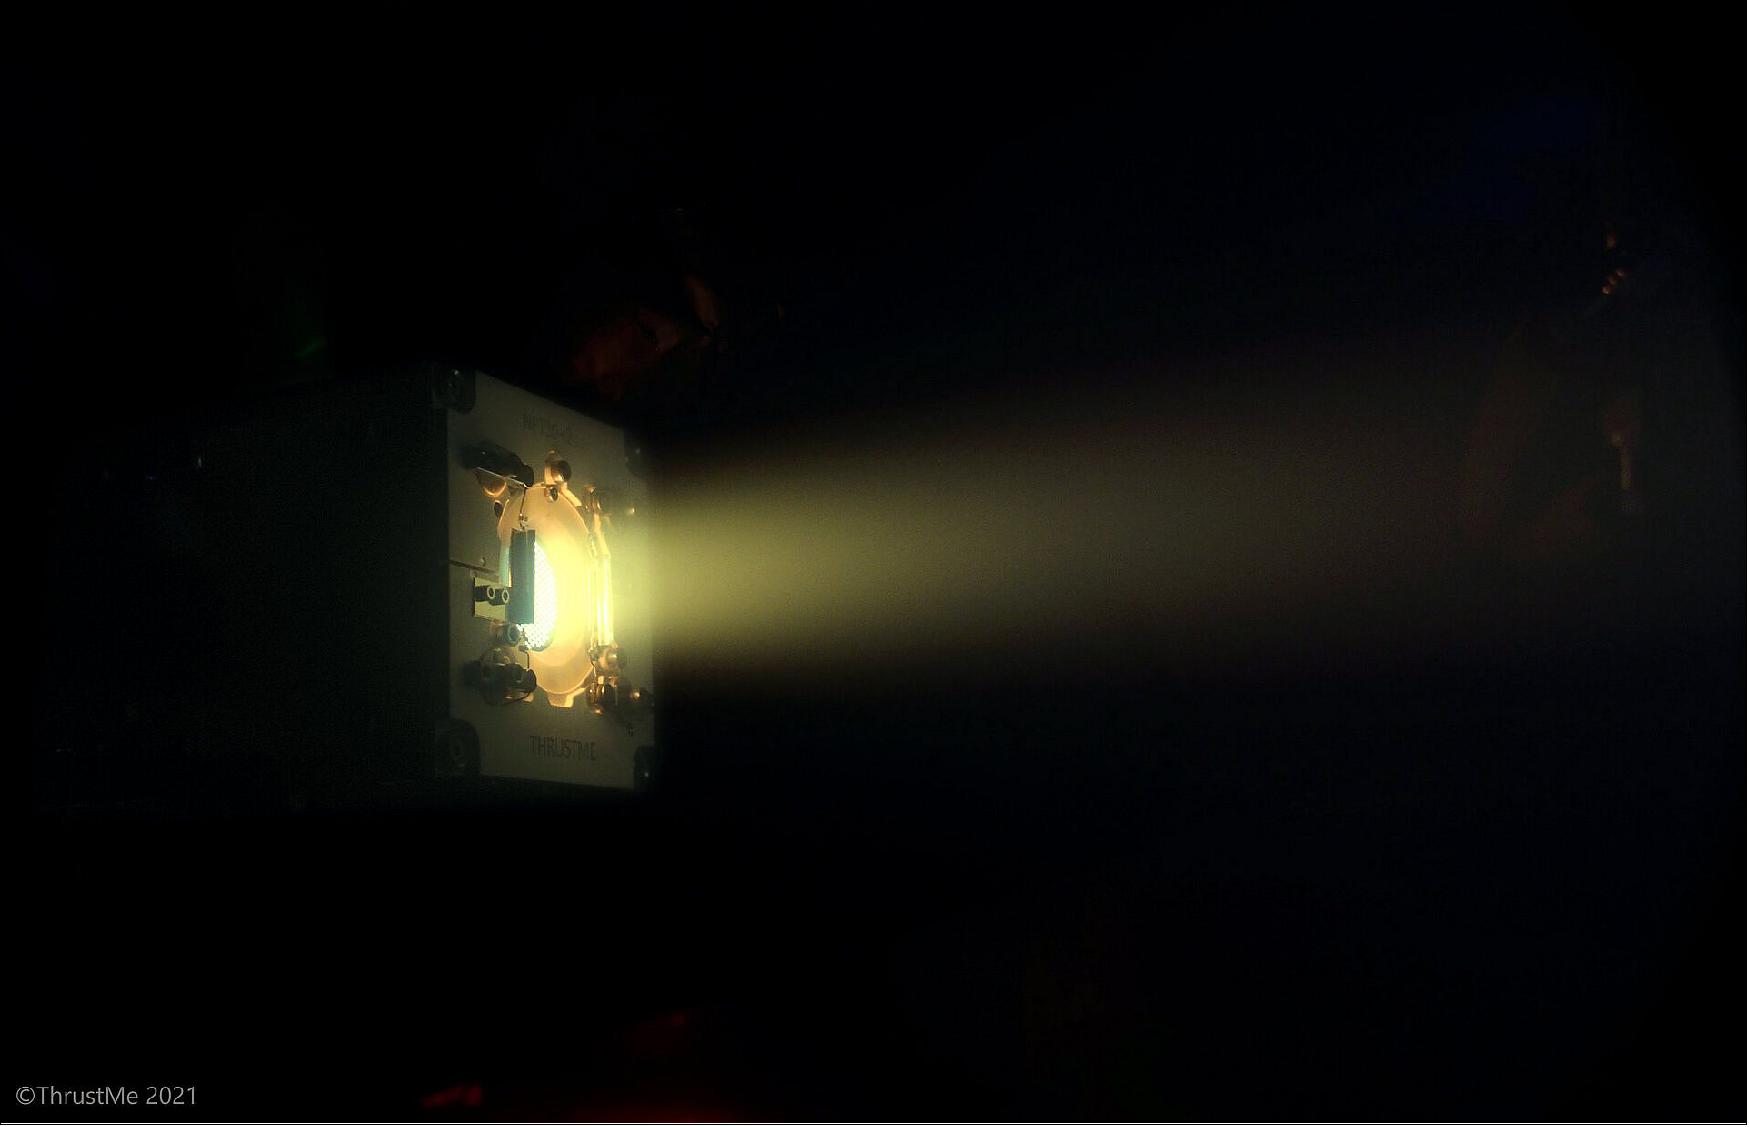 Figure 9: An iodine thruster was used to change the orbit of a small satellite for the first time ever (image credit: ThrustMe)